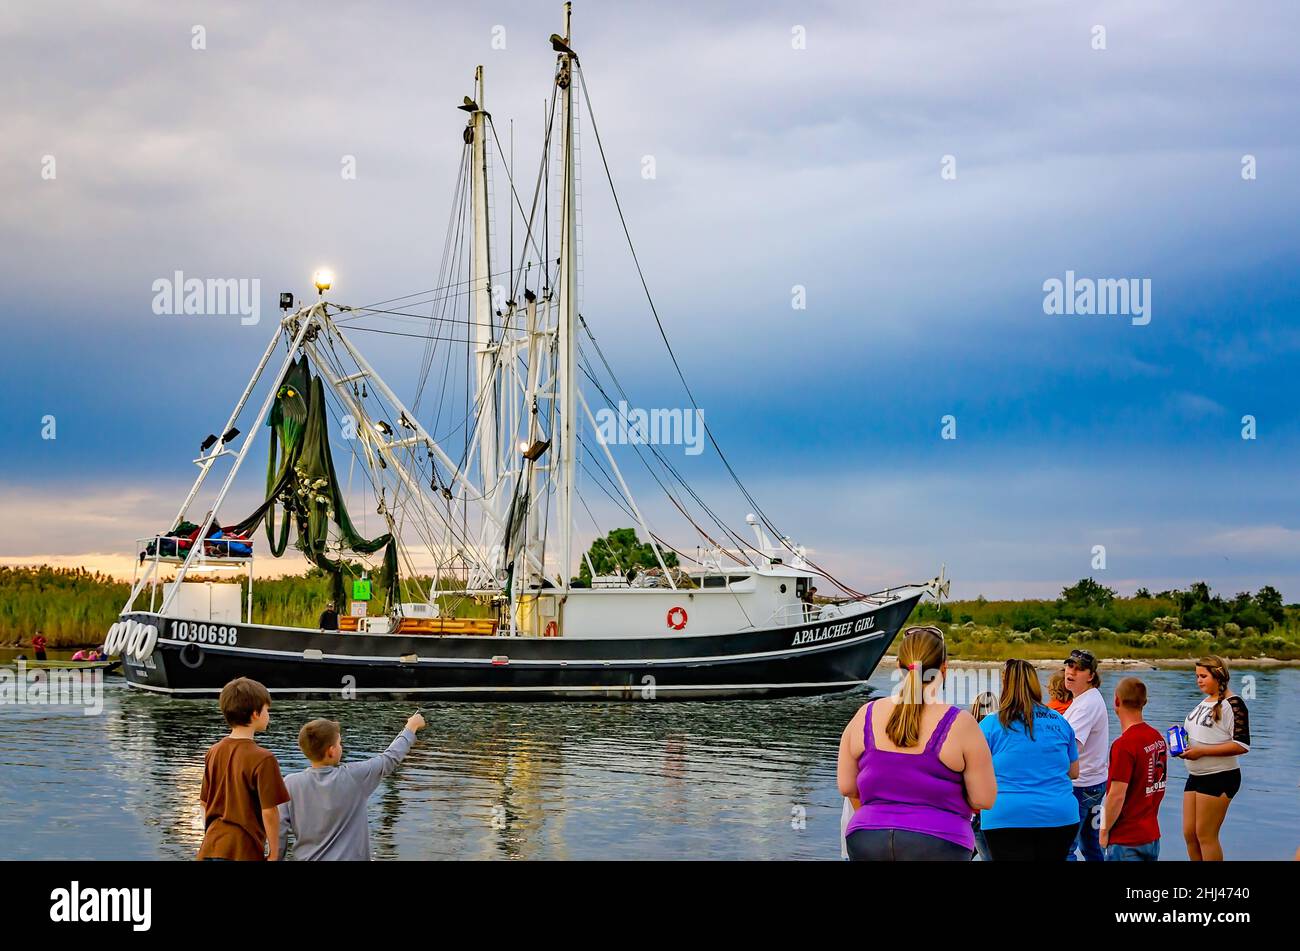 Family members watch as Apalachee Girl, a shrimp boat, arrives home after a long shrimping trip, Oct. 27, 2013, in Bayou La Batre, Alabama. Stock Photo